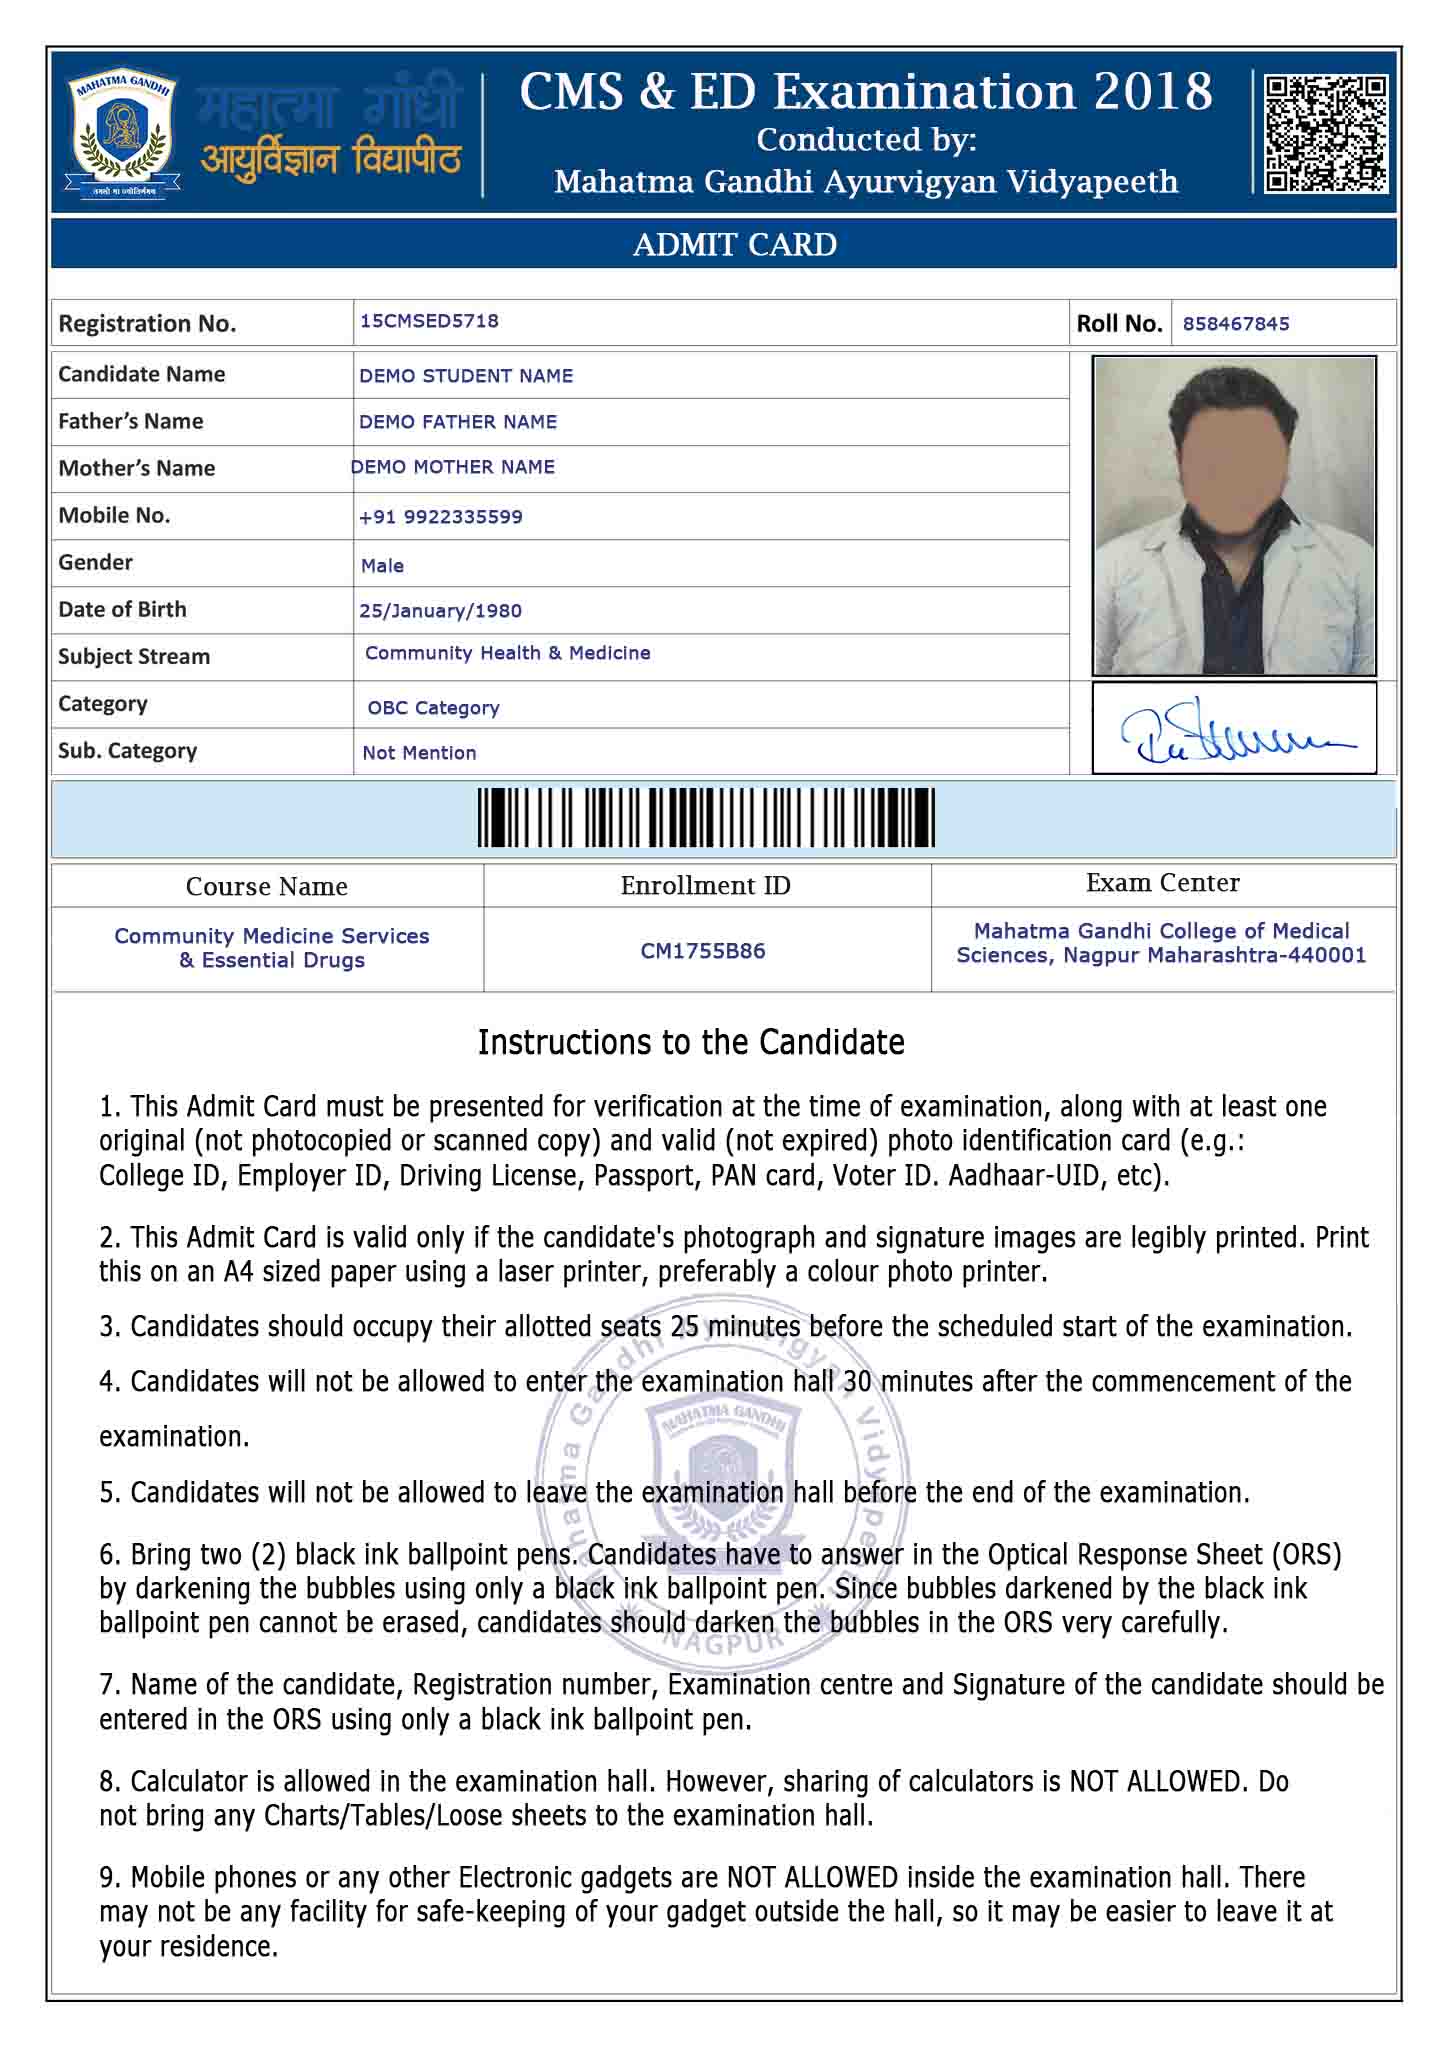 ADMIT CARD CMSED DEMO